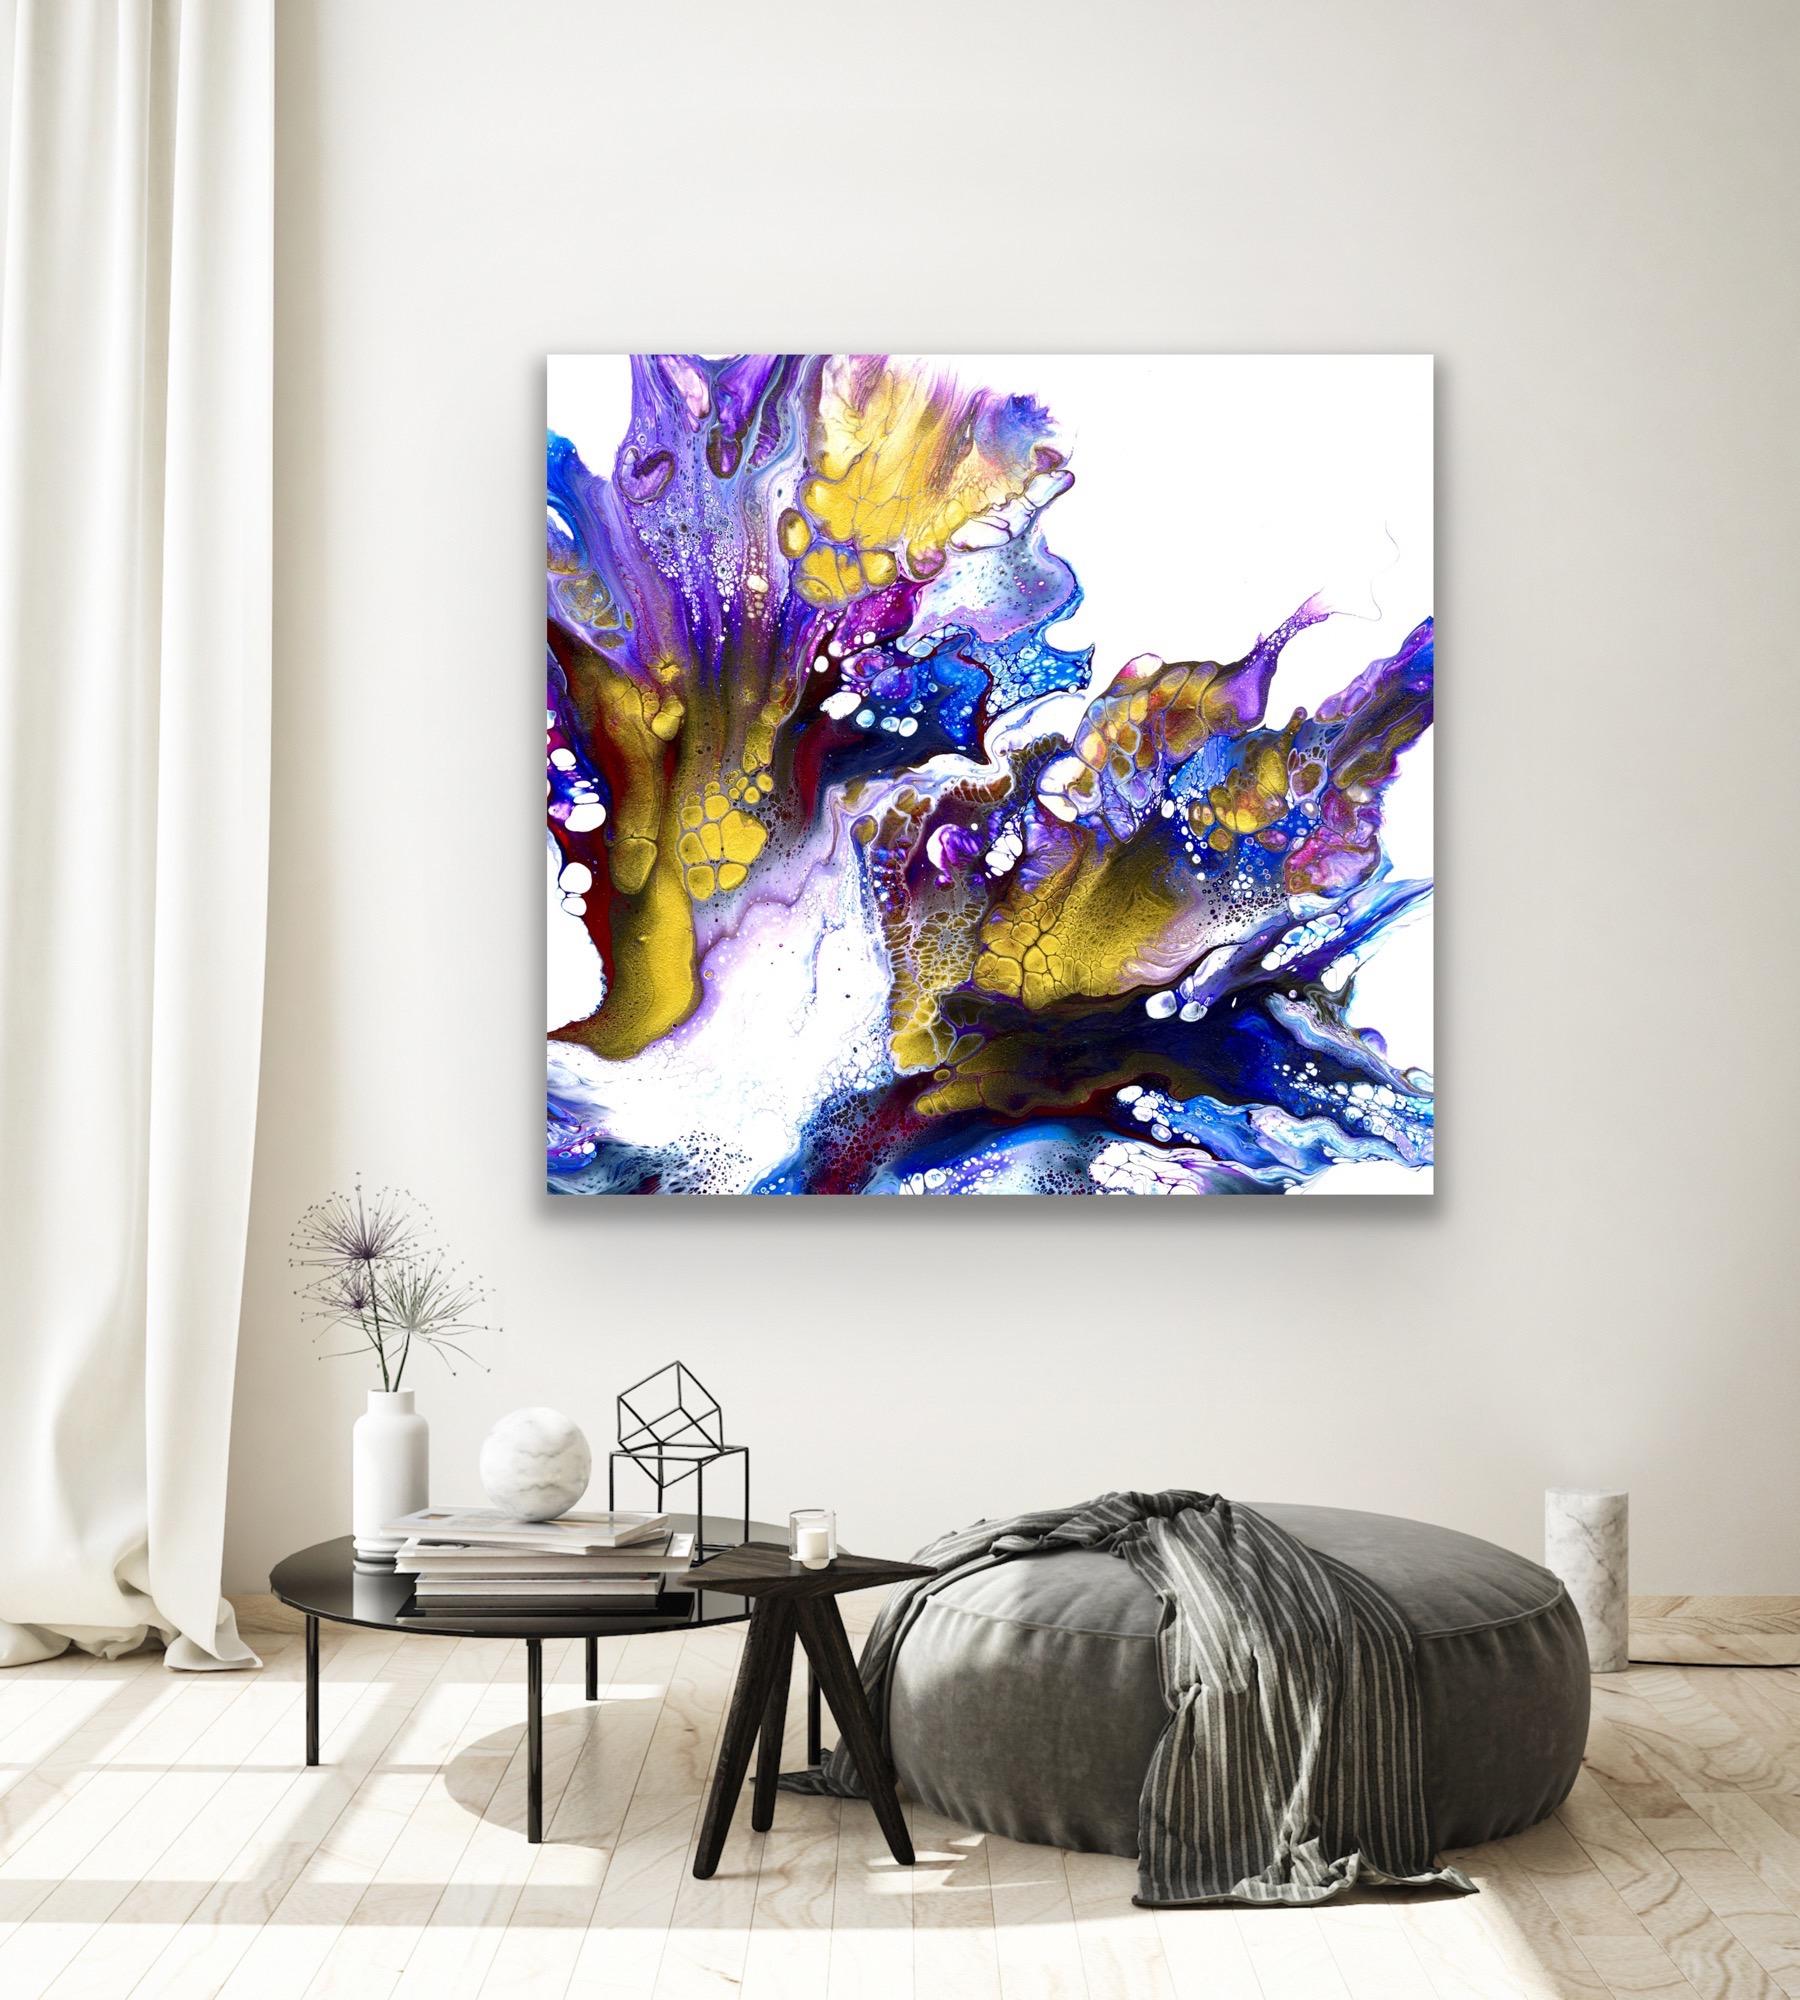 This contemporary modern abstract painting is printed on a lightweight metal composite and comes ready to hang. This vibrant composition can be hung both indoor and outdoor as it is weather resistant.

-Title: Violet Dreams
-Artist: Celeste